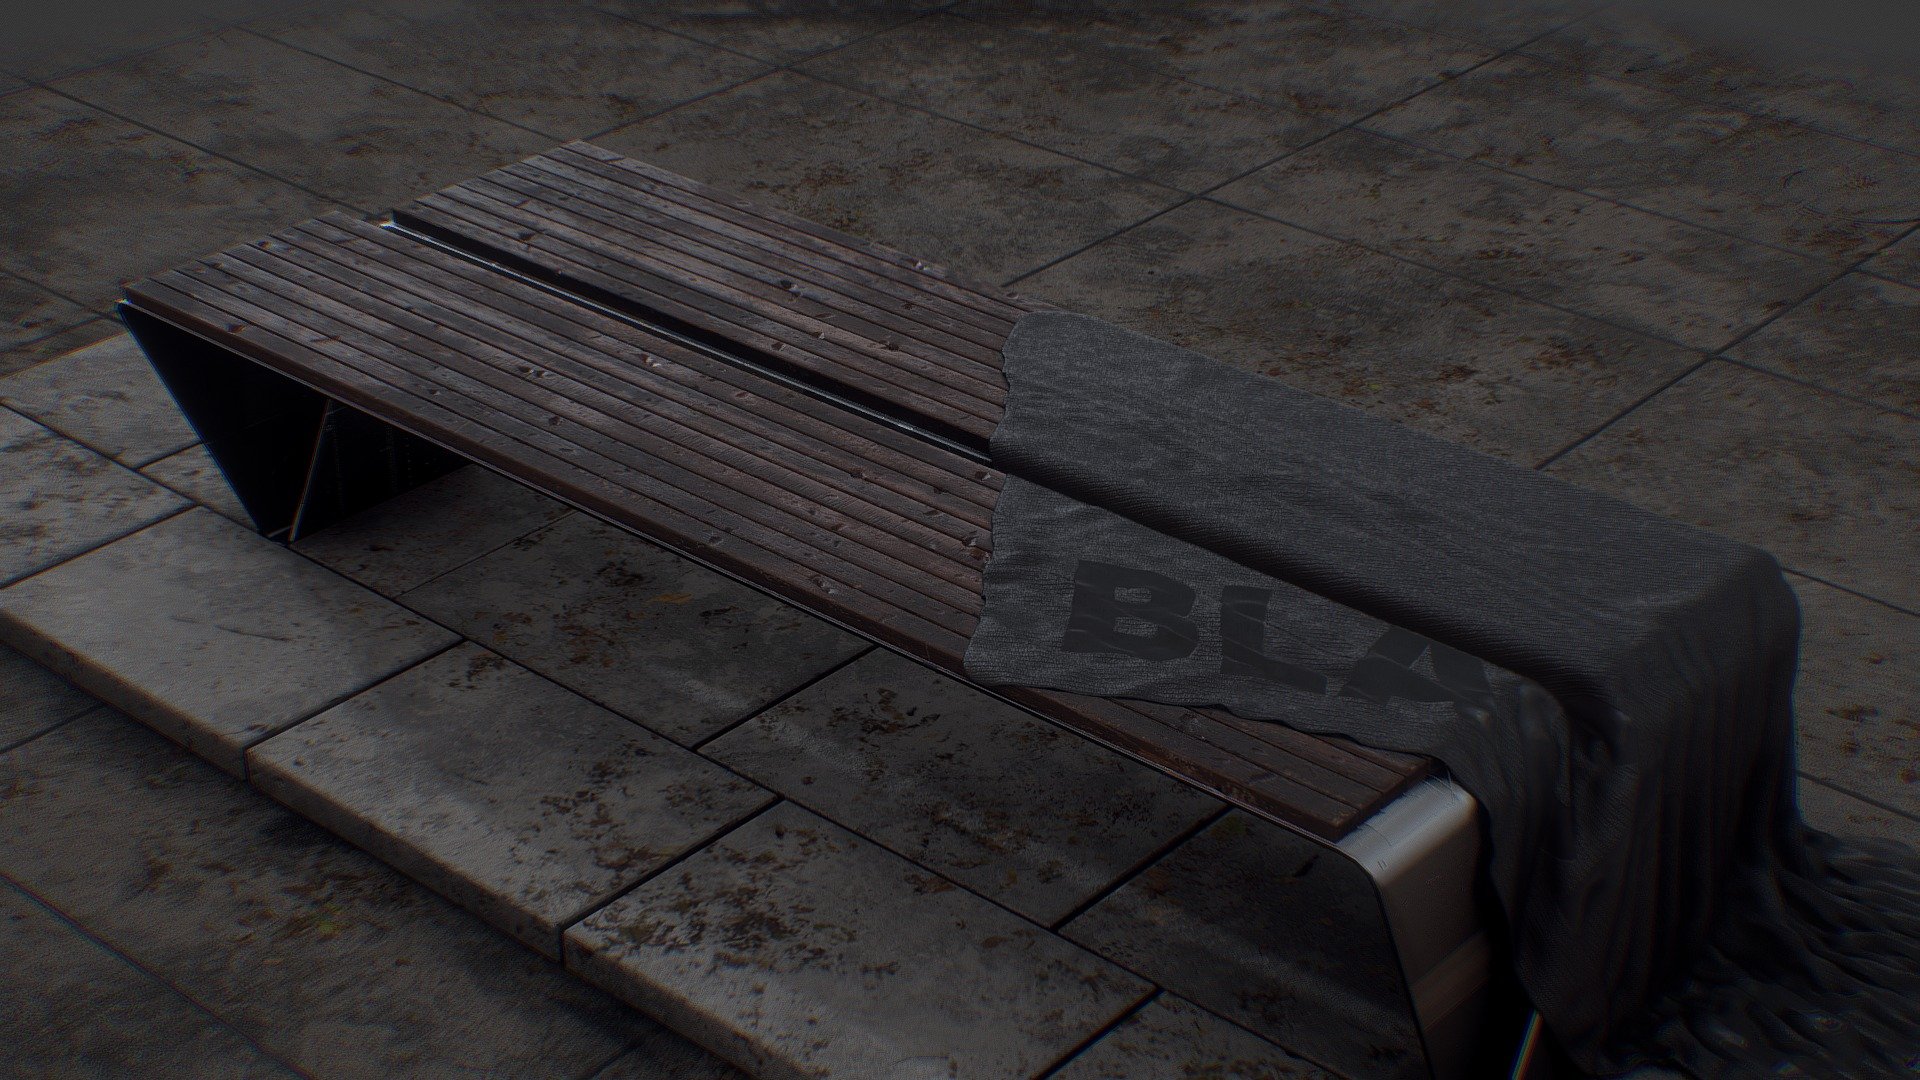 Drag and Drop and you are good to go. 4k Textures.

Check my profile for free models https://sketchfab.com/re1monsen If you enjoy my work please consider supporting me I have many affordable models in the shop. Smash that follow!

Feel free to contact me. I’d love yo hear from you.

Thanks! - Bench - Download Free 3D model by re1monsen 3d model